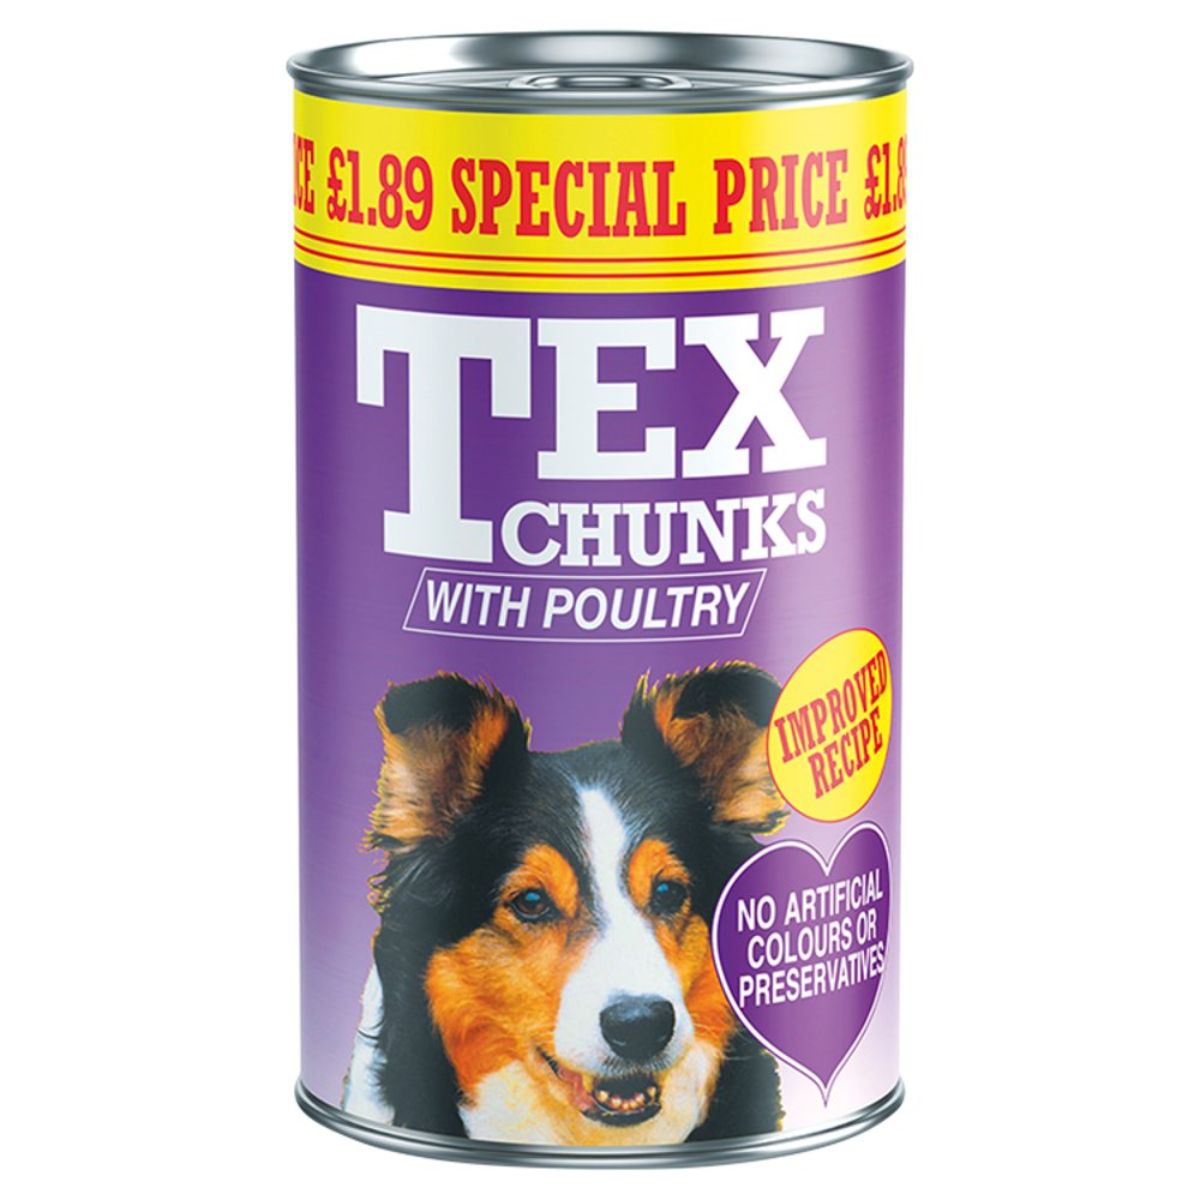 A can of Tex - Chunks with Poultry - 1.2kg.